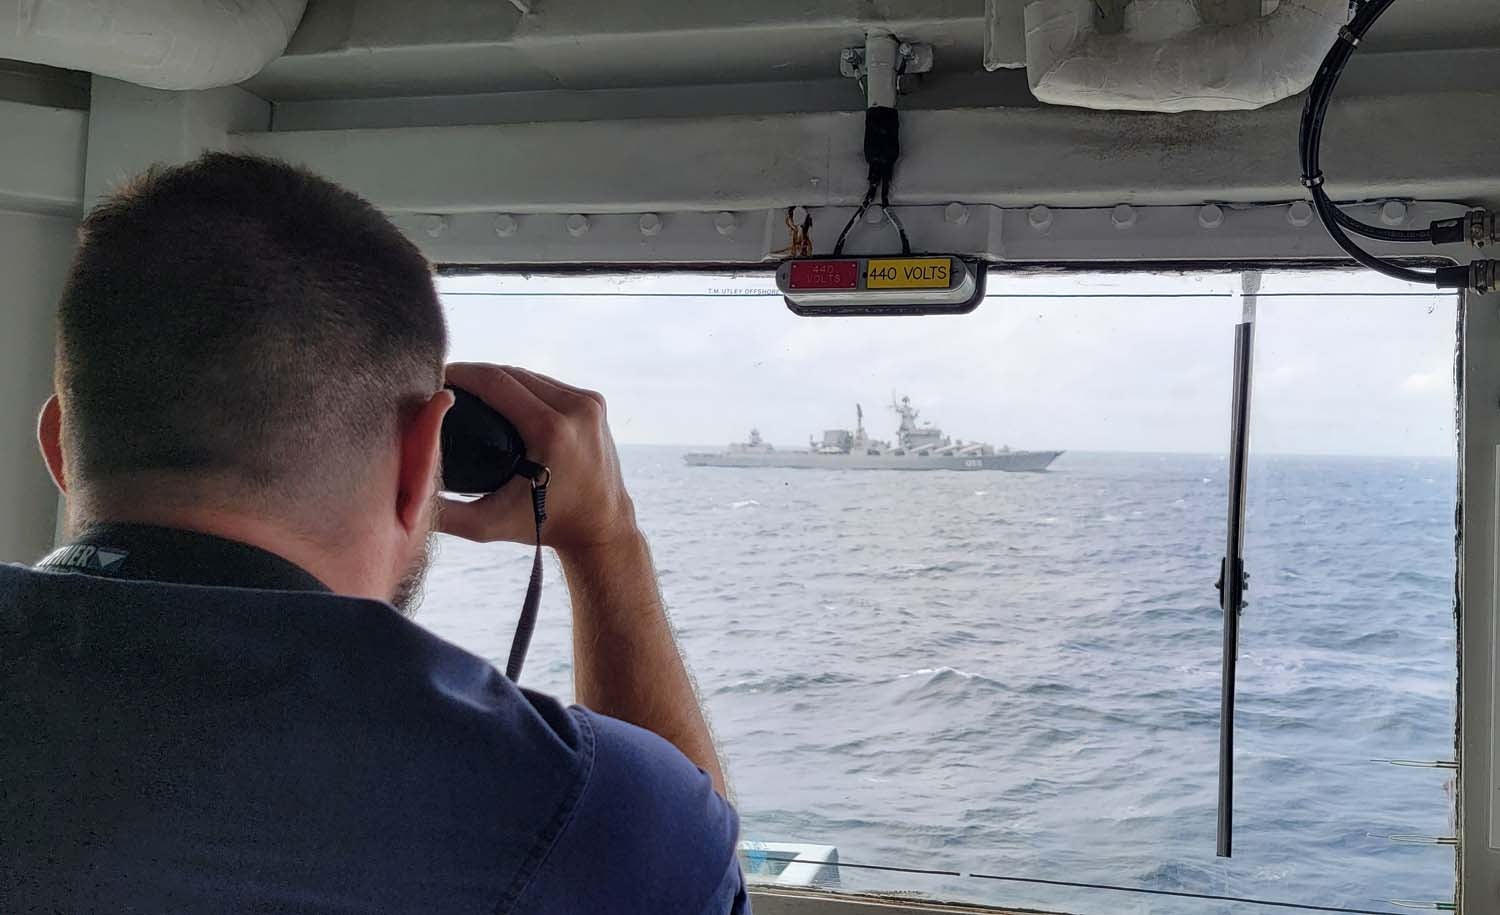 Nato and allied naval forces monitor three Russian ships in North Sea